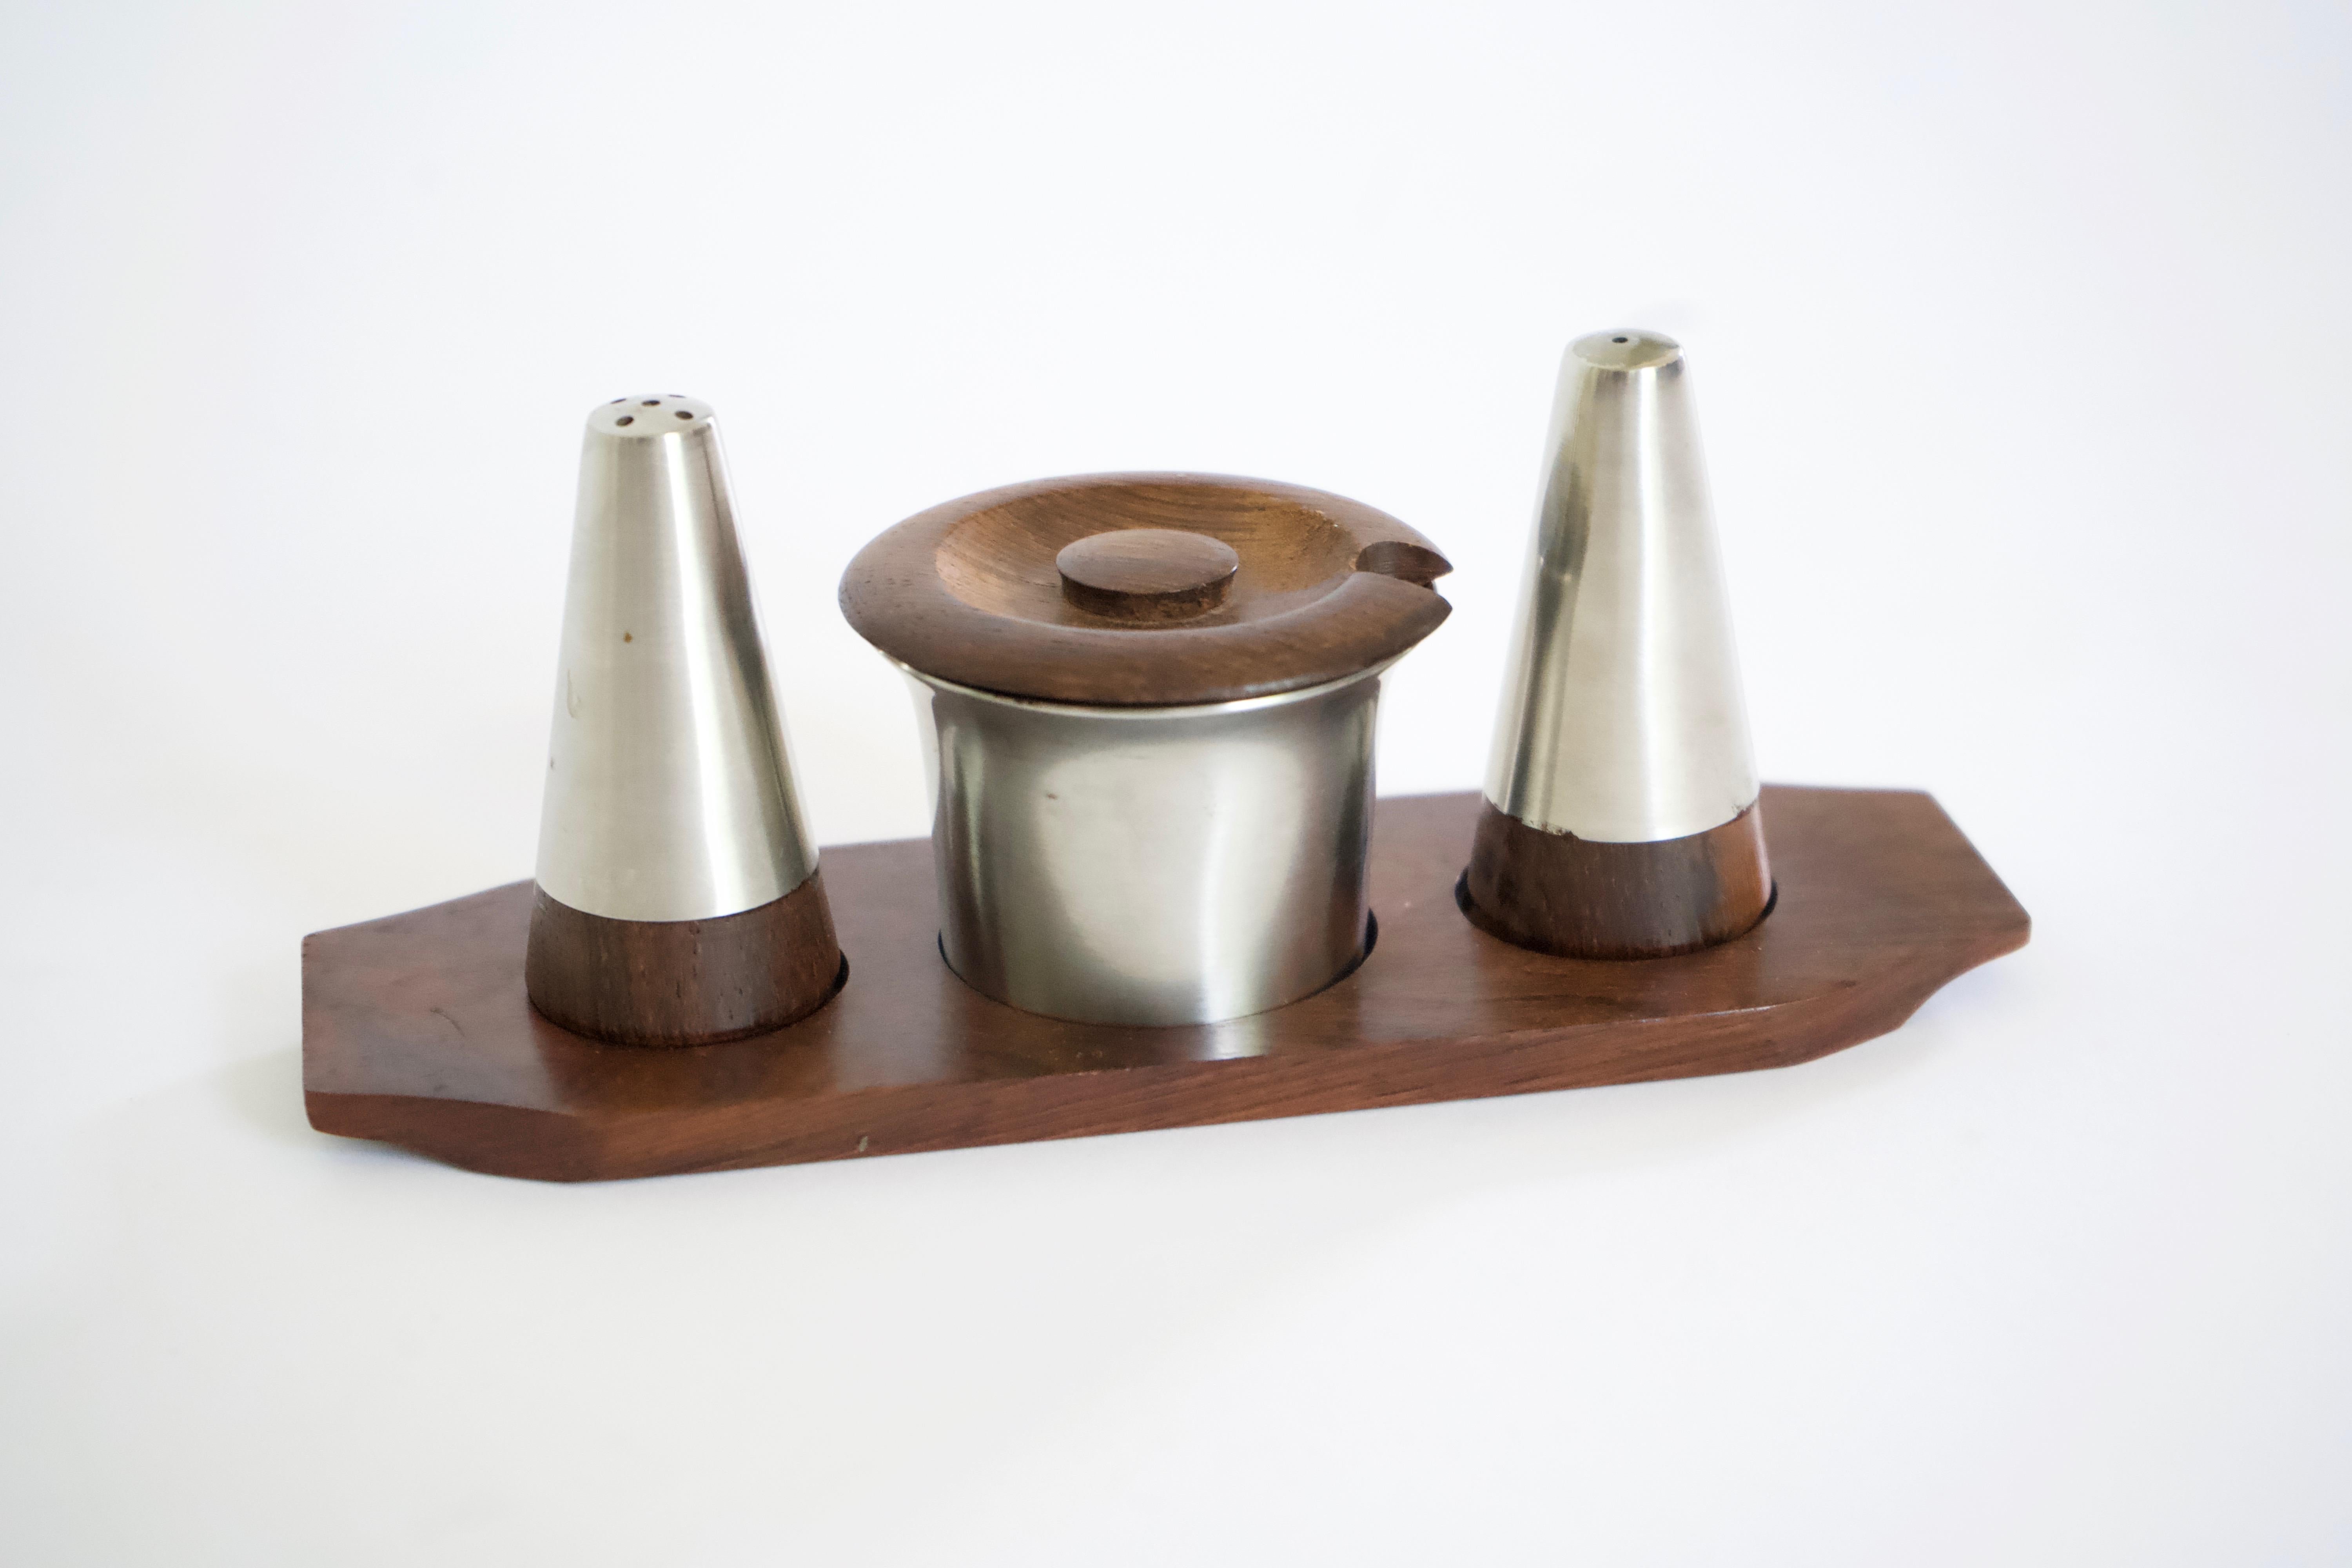 Mid-20th Century Mid-Century Modern Danish Rosewood Salt and Pepper Shaker Set by Lundtofte For Sale